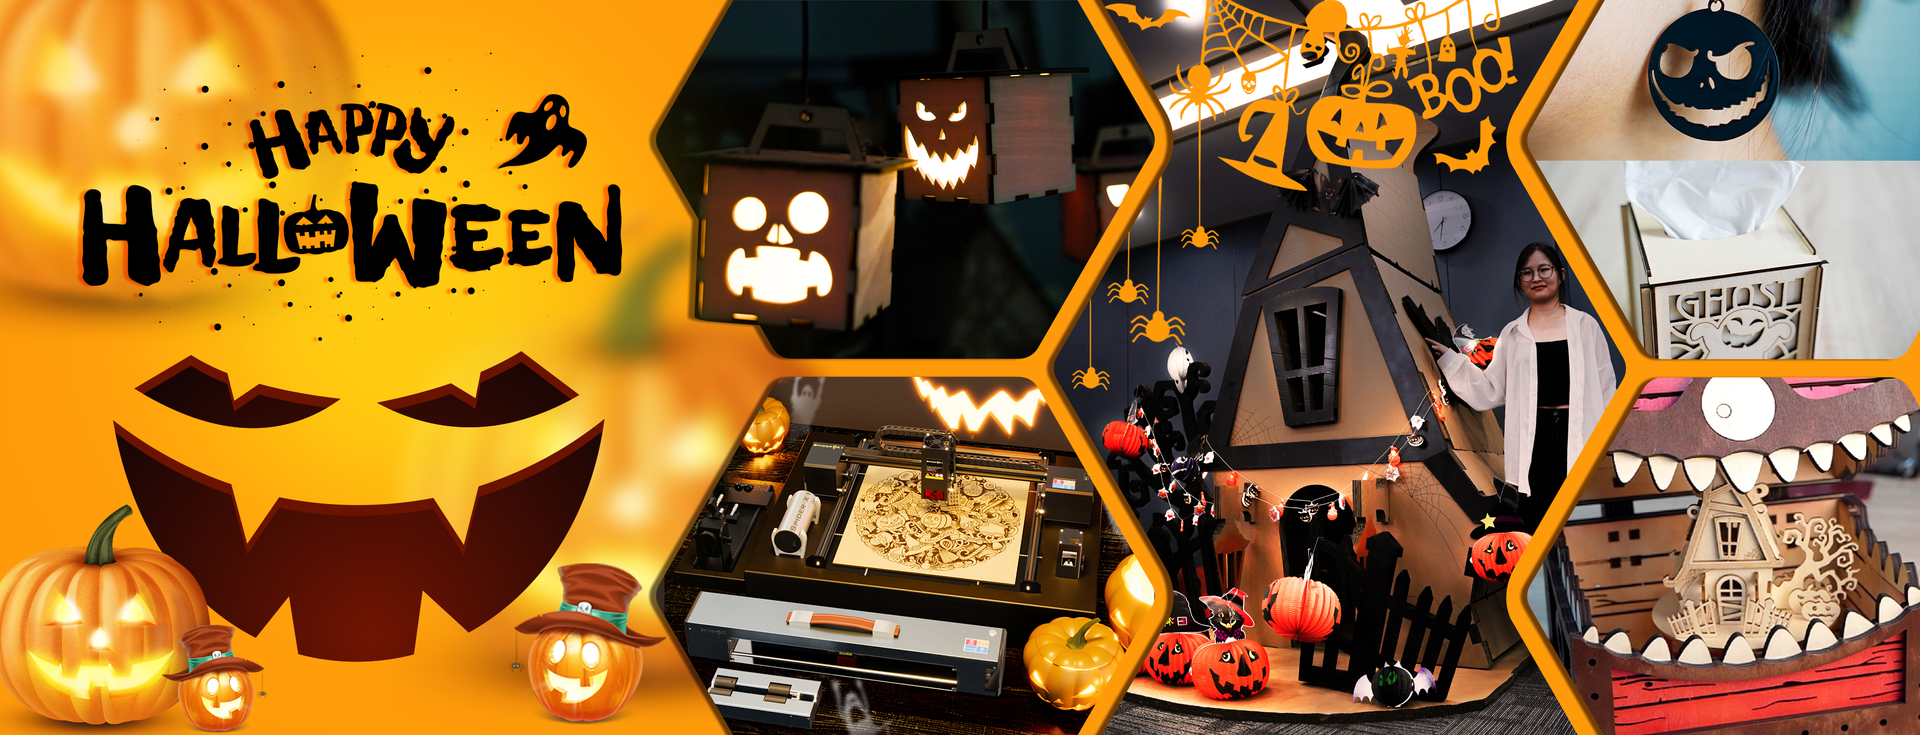 Happy Halloween Purchase---10% Extra Save Base on 25% Discount!